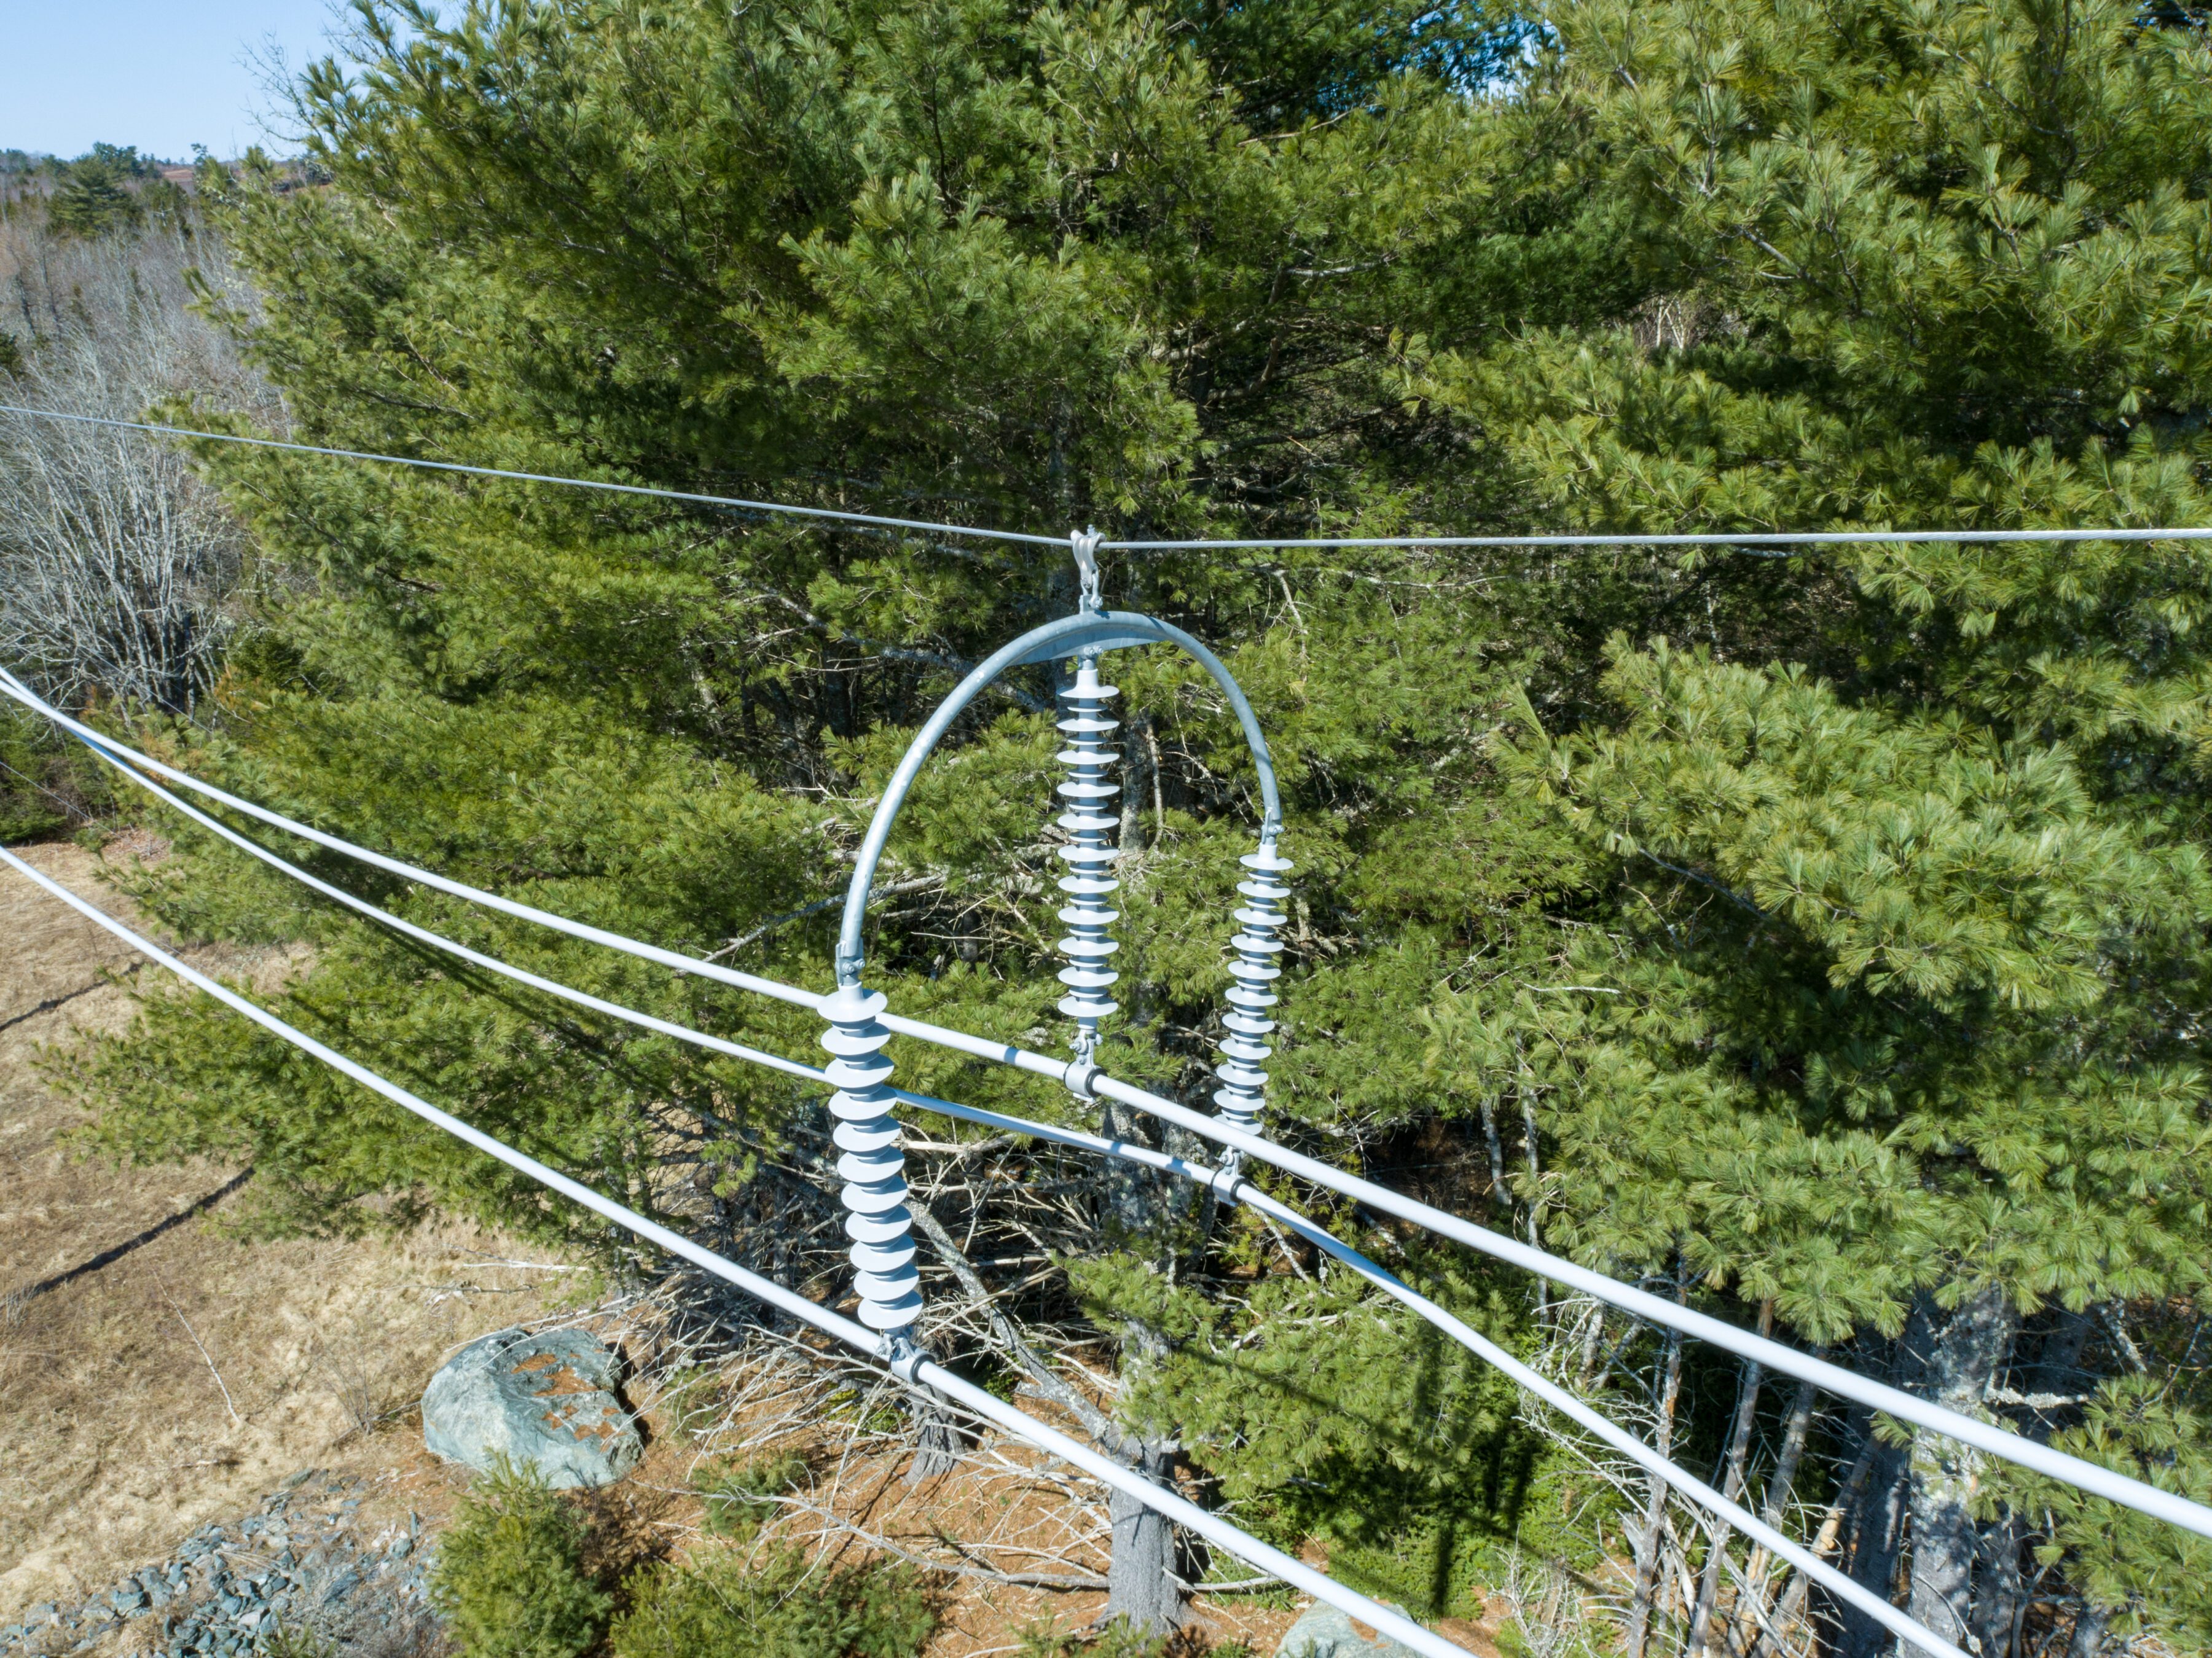 115kV spacer mid-span in a treed area